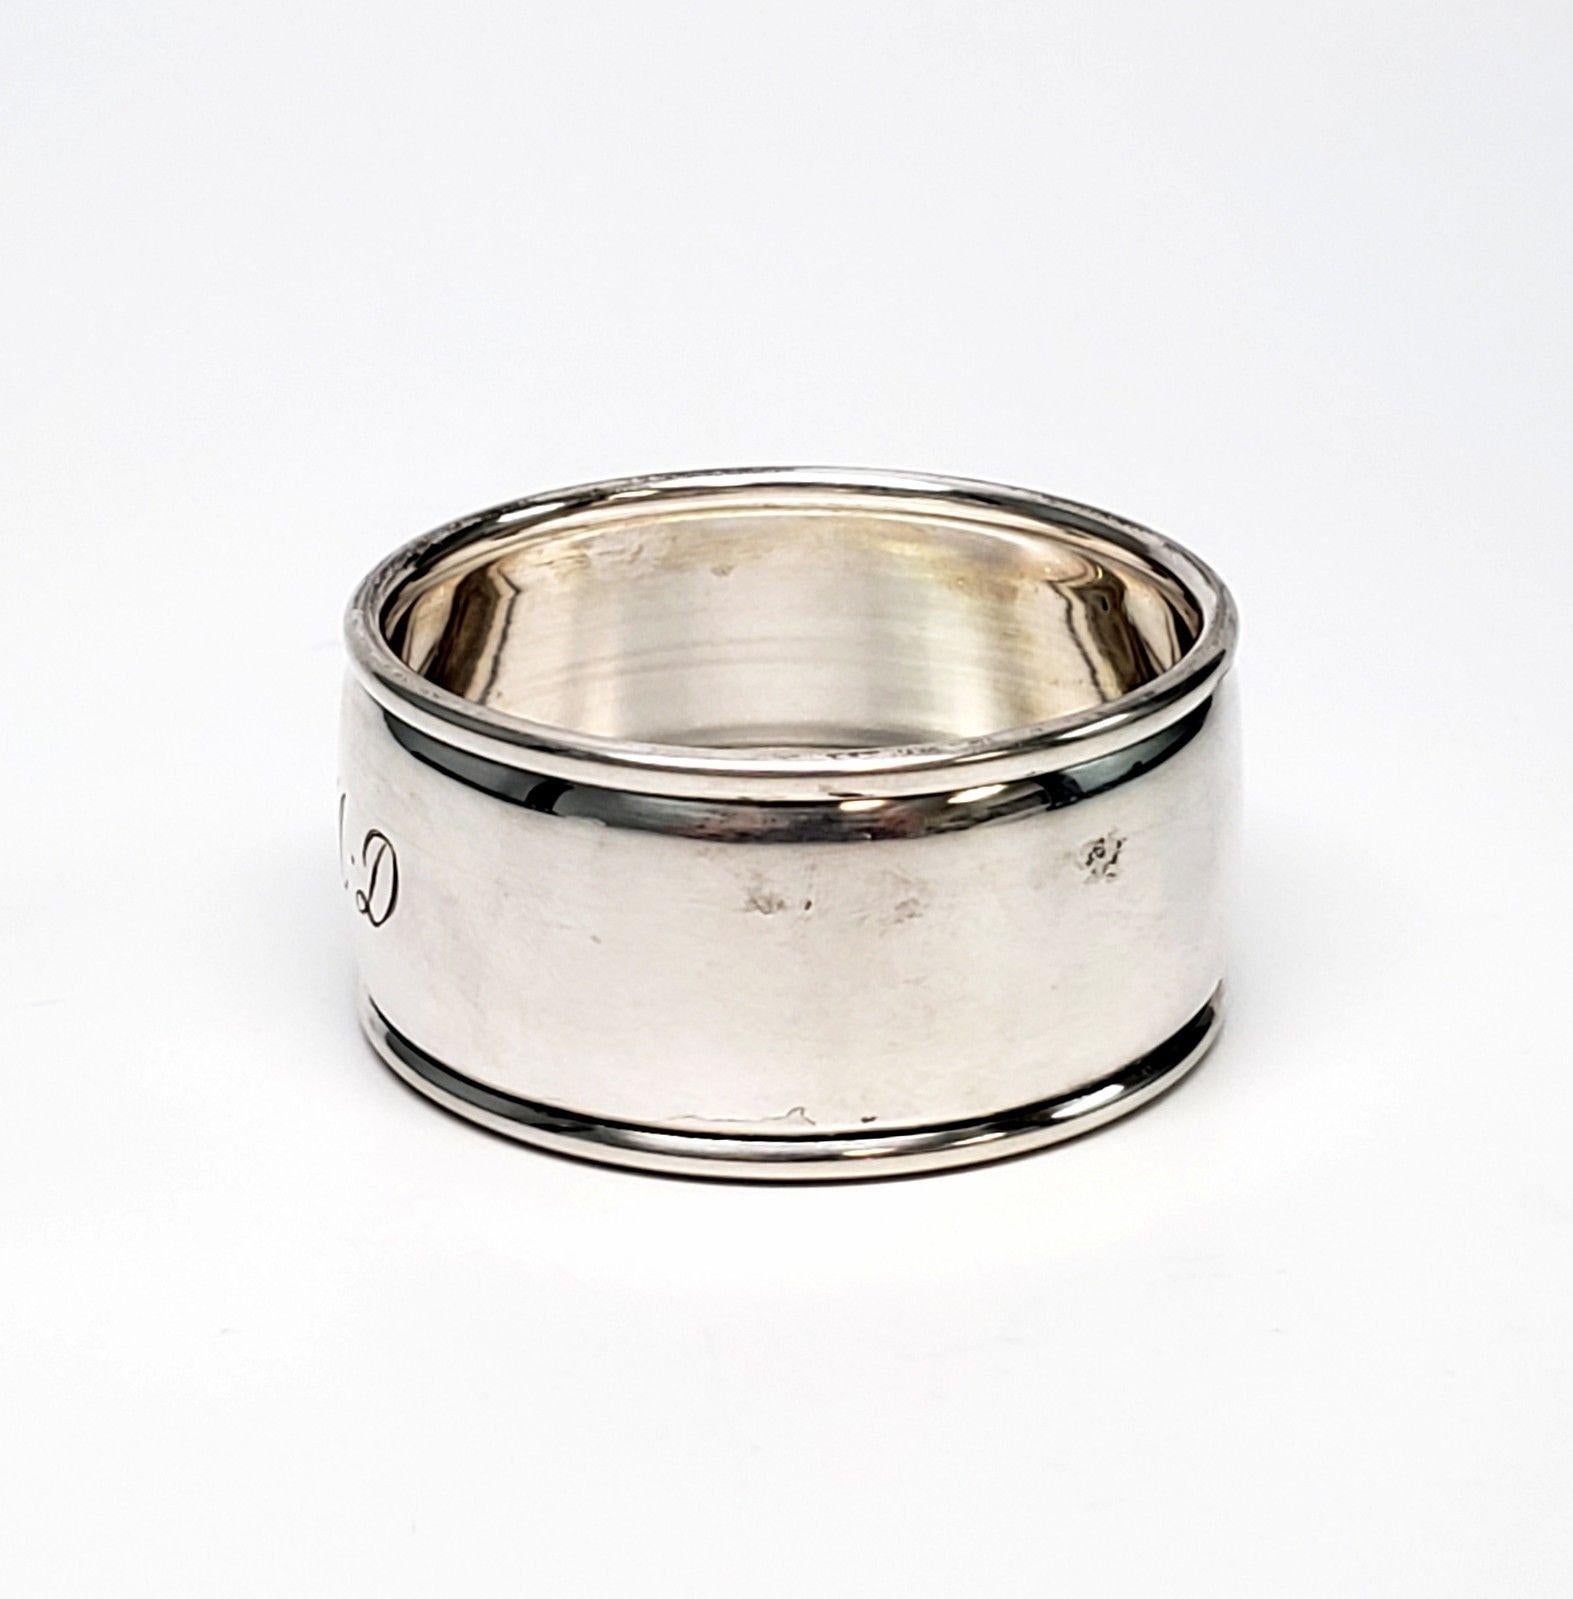 20th Century Tiffany & Co. Sterling Silver Napkin Ring with Monogram